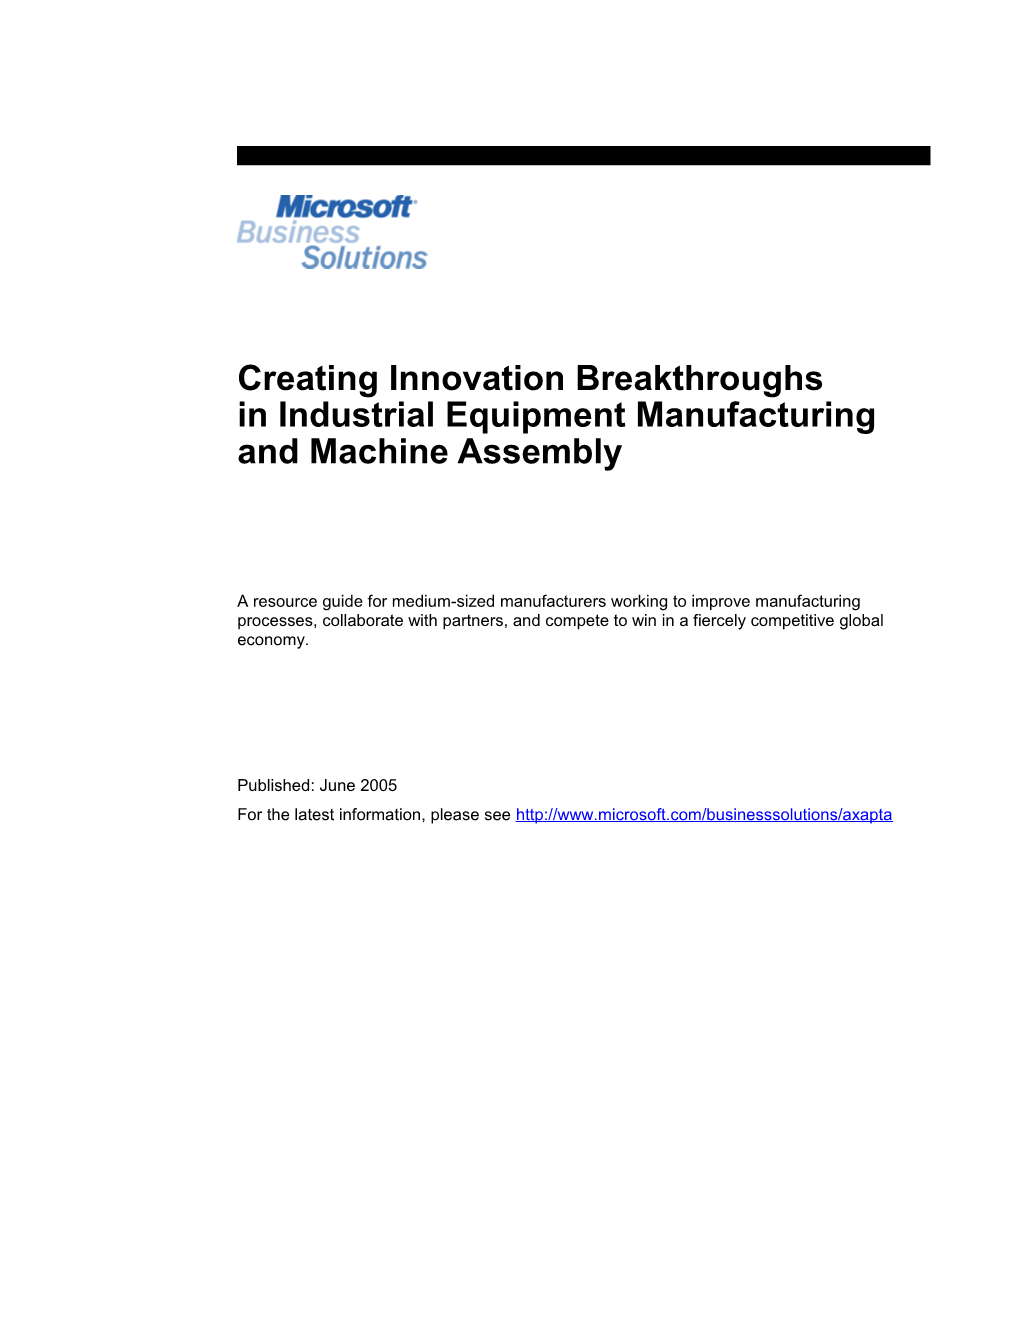 Creating Innovation Breakthroughs in Industrial Equipment Manufacturing and Machine Assembly